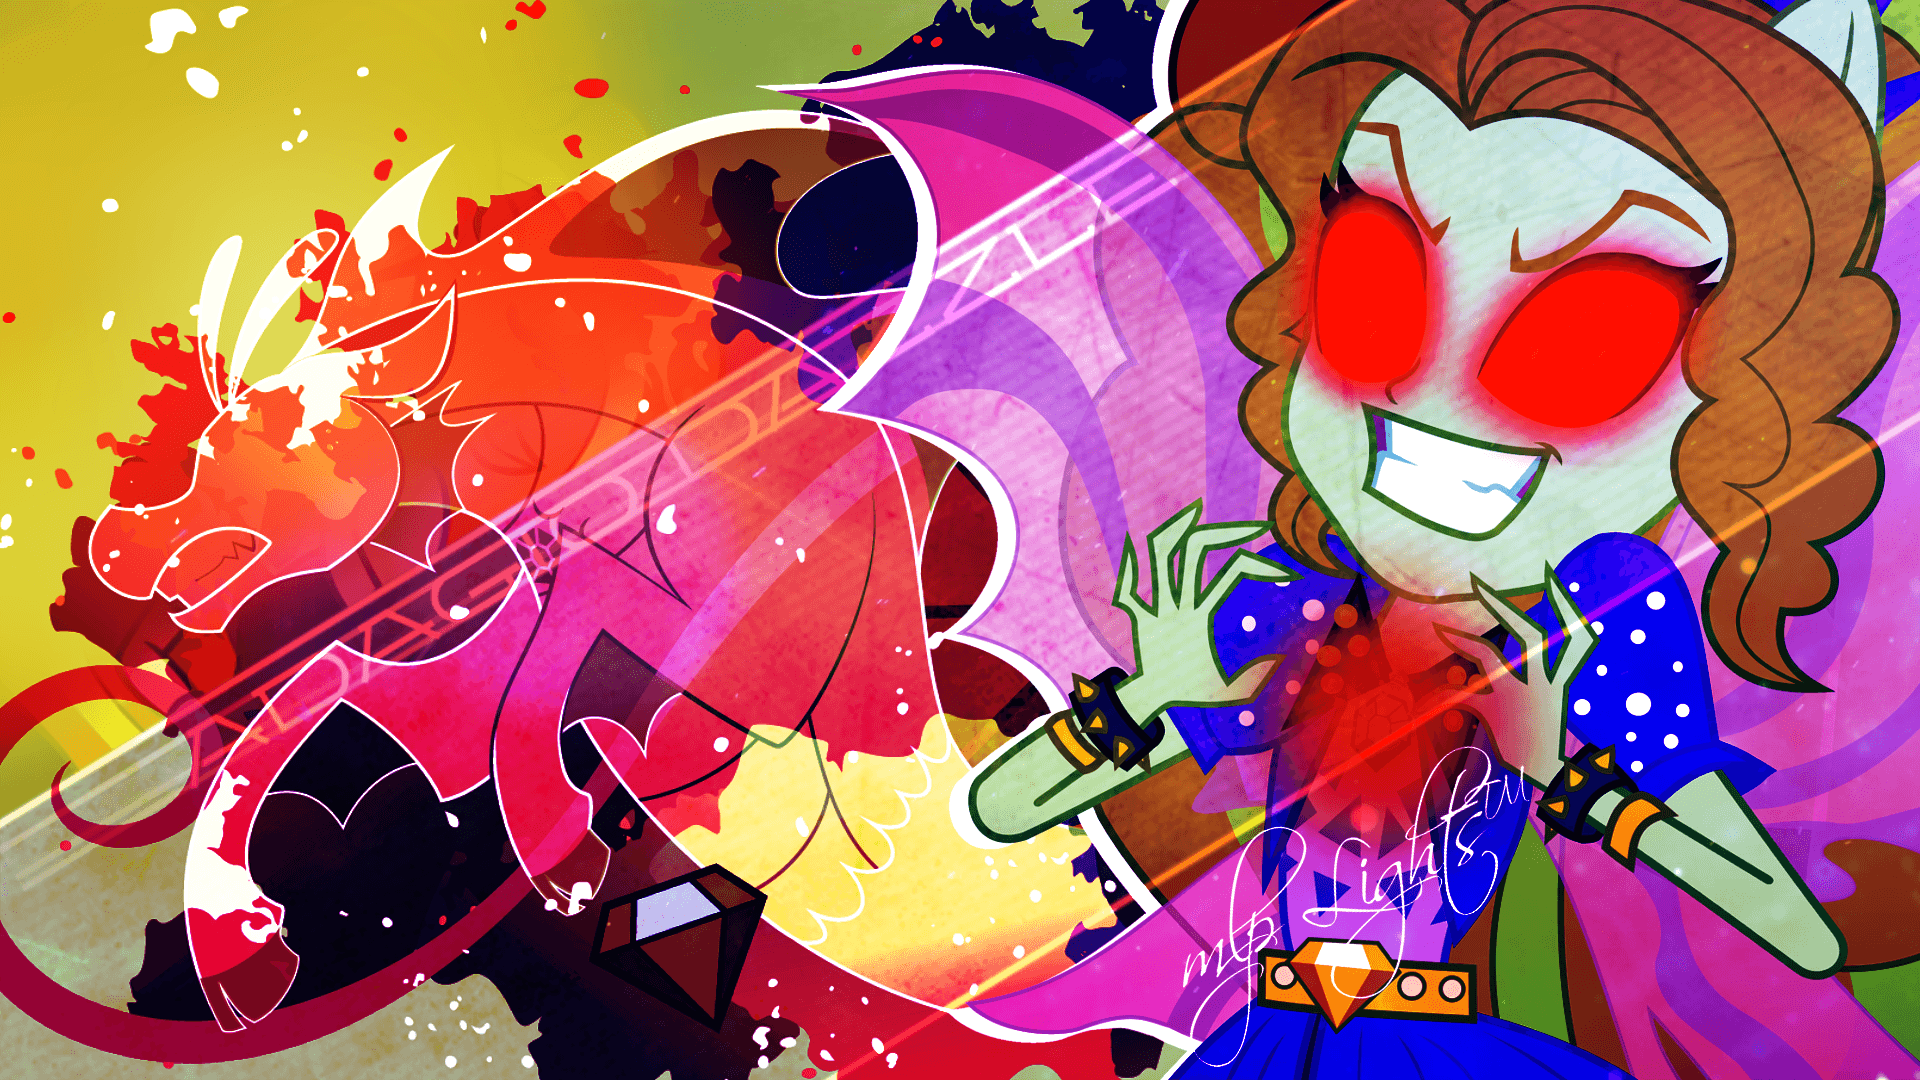 Adagio Wallpaper Idk I don't really like it tho :^ Free to use but